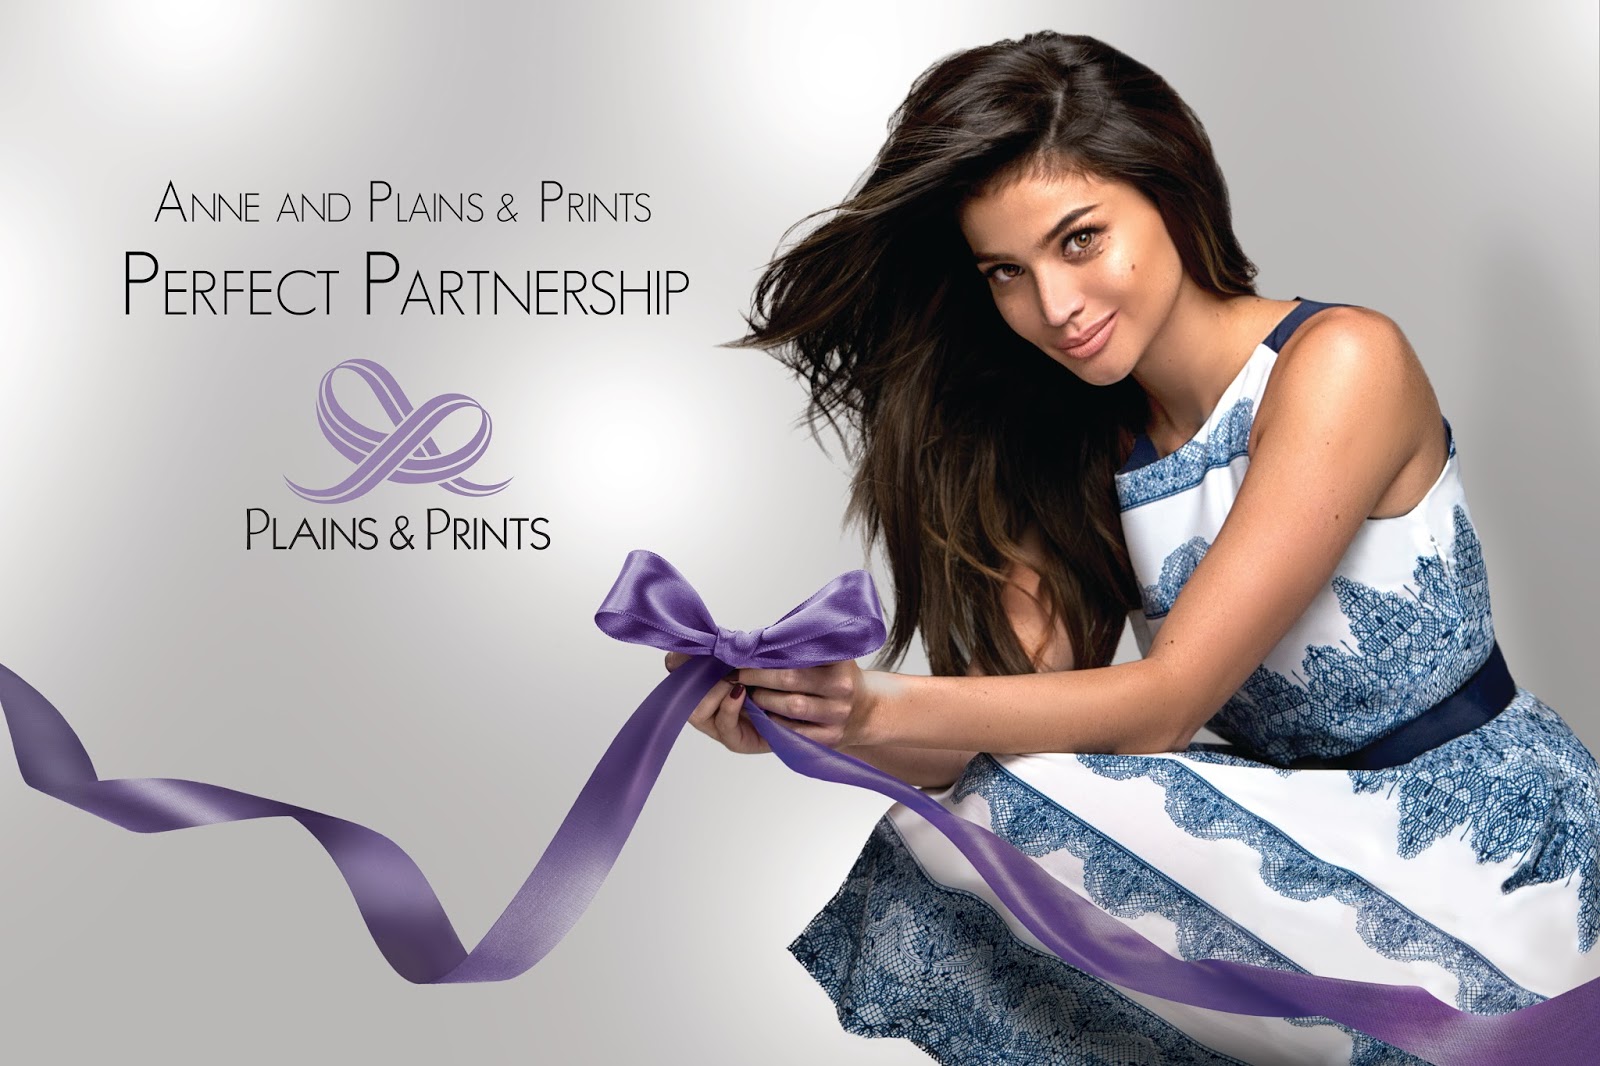 Plains & Prints - Anne Curtis whets our appetite for fashion with